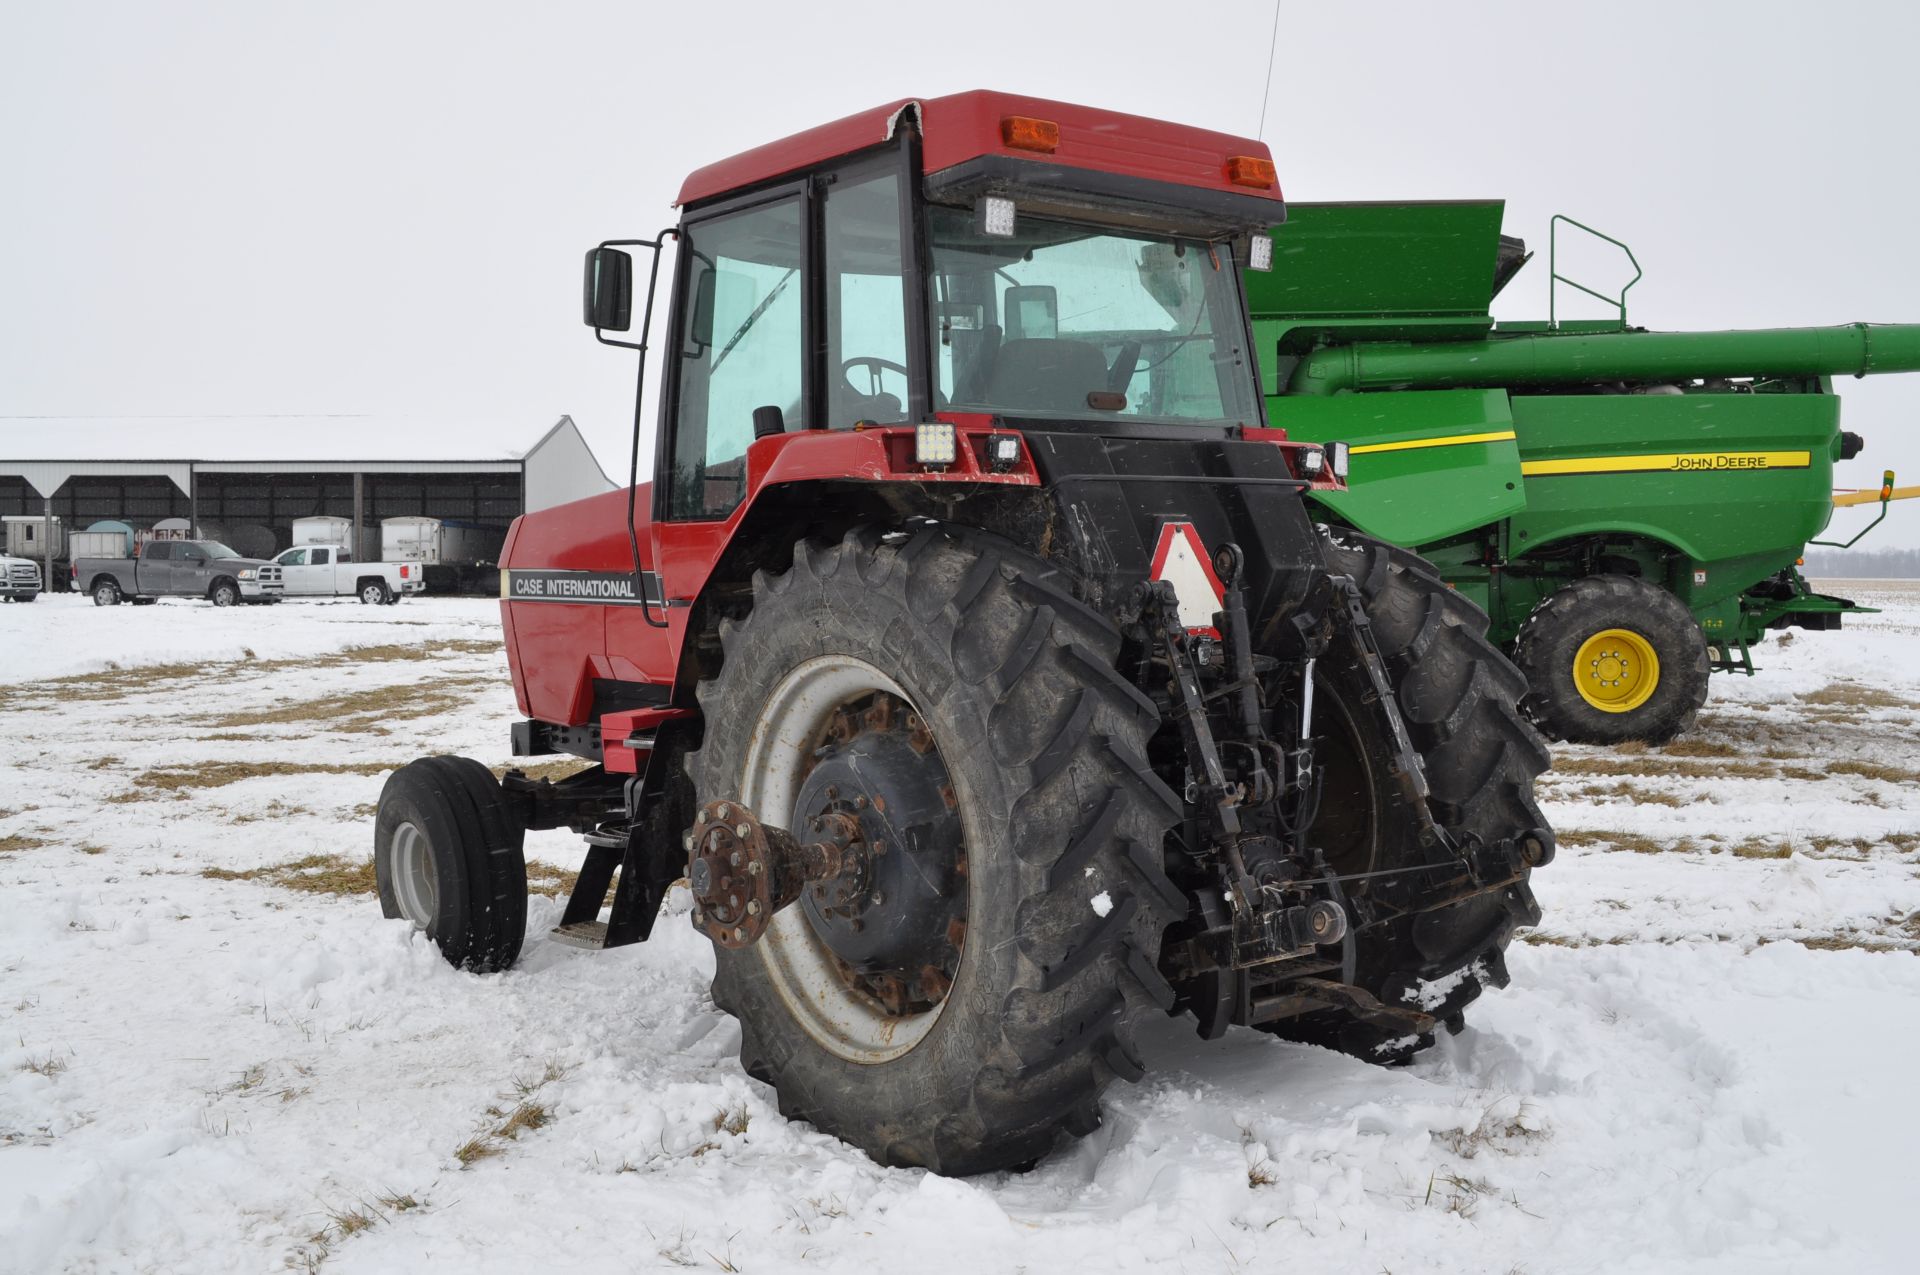 Case IH 7120 tractor, 2WD, power shift, 18.4 R 42 tires, 540/1000 PTO, 3 hyd remotes, 3 pt, shows - Image 5 of 37